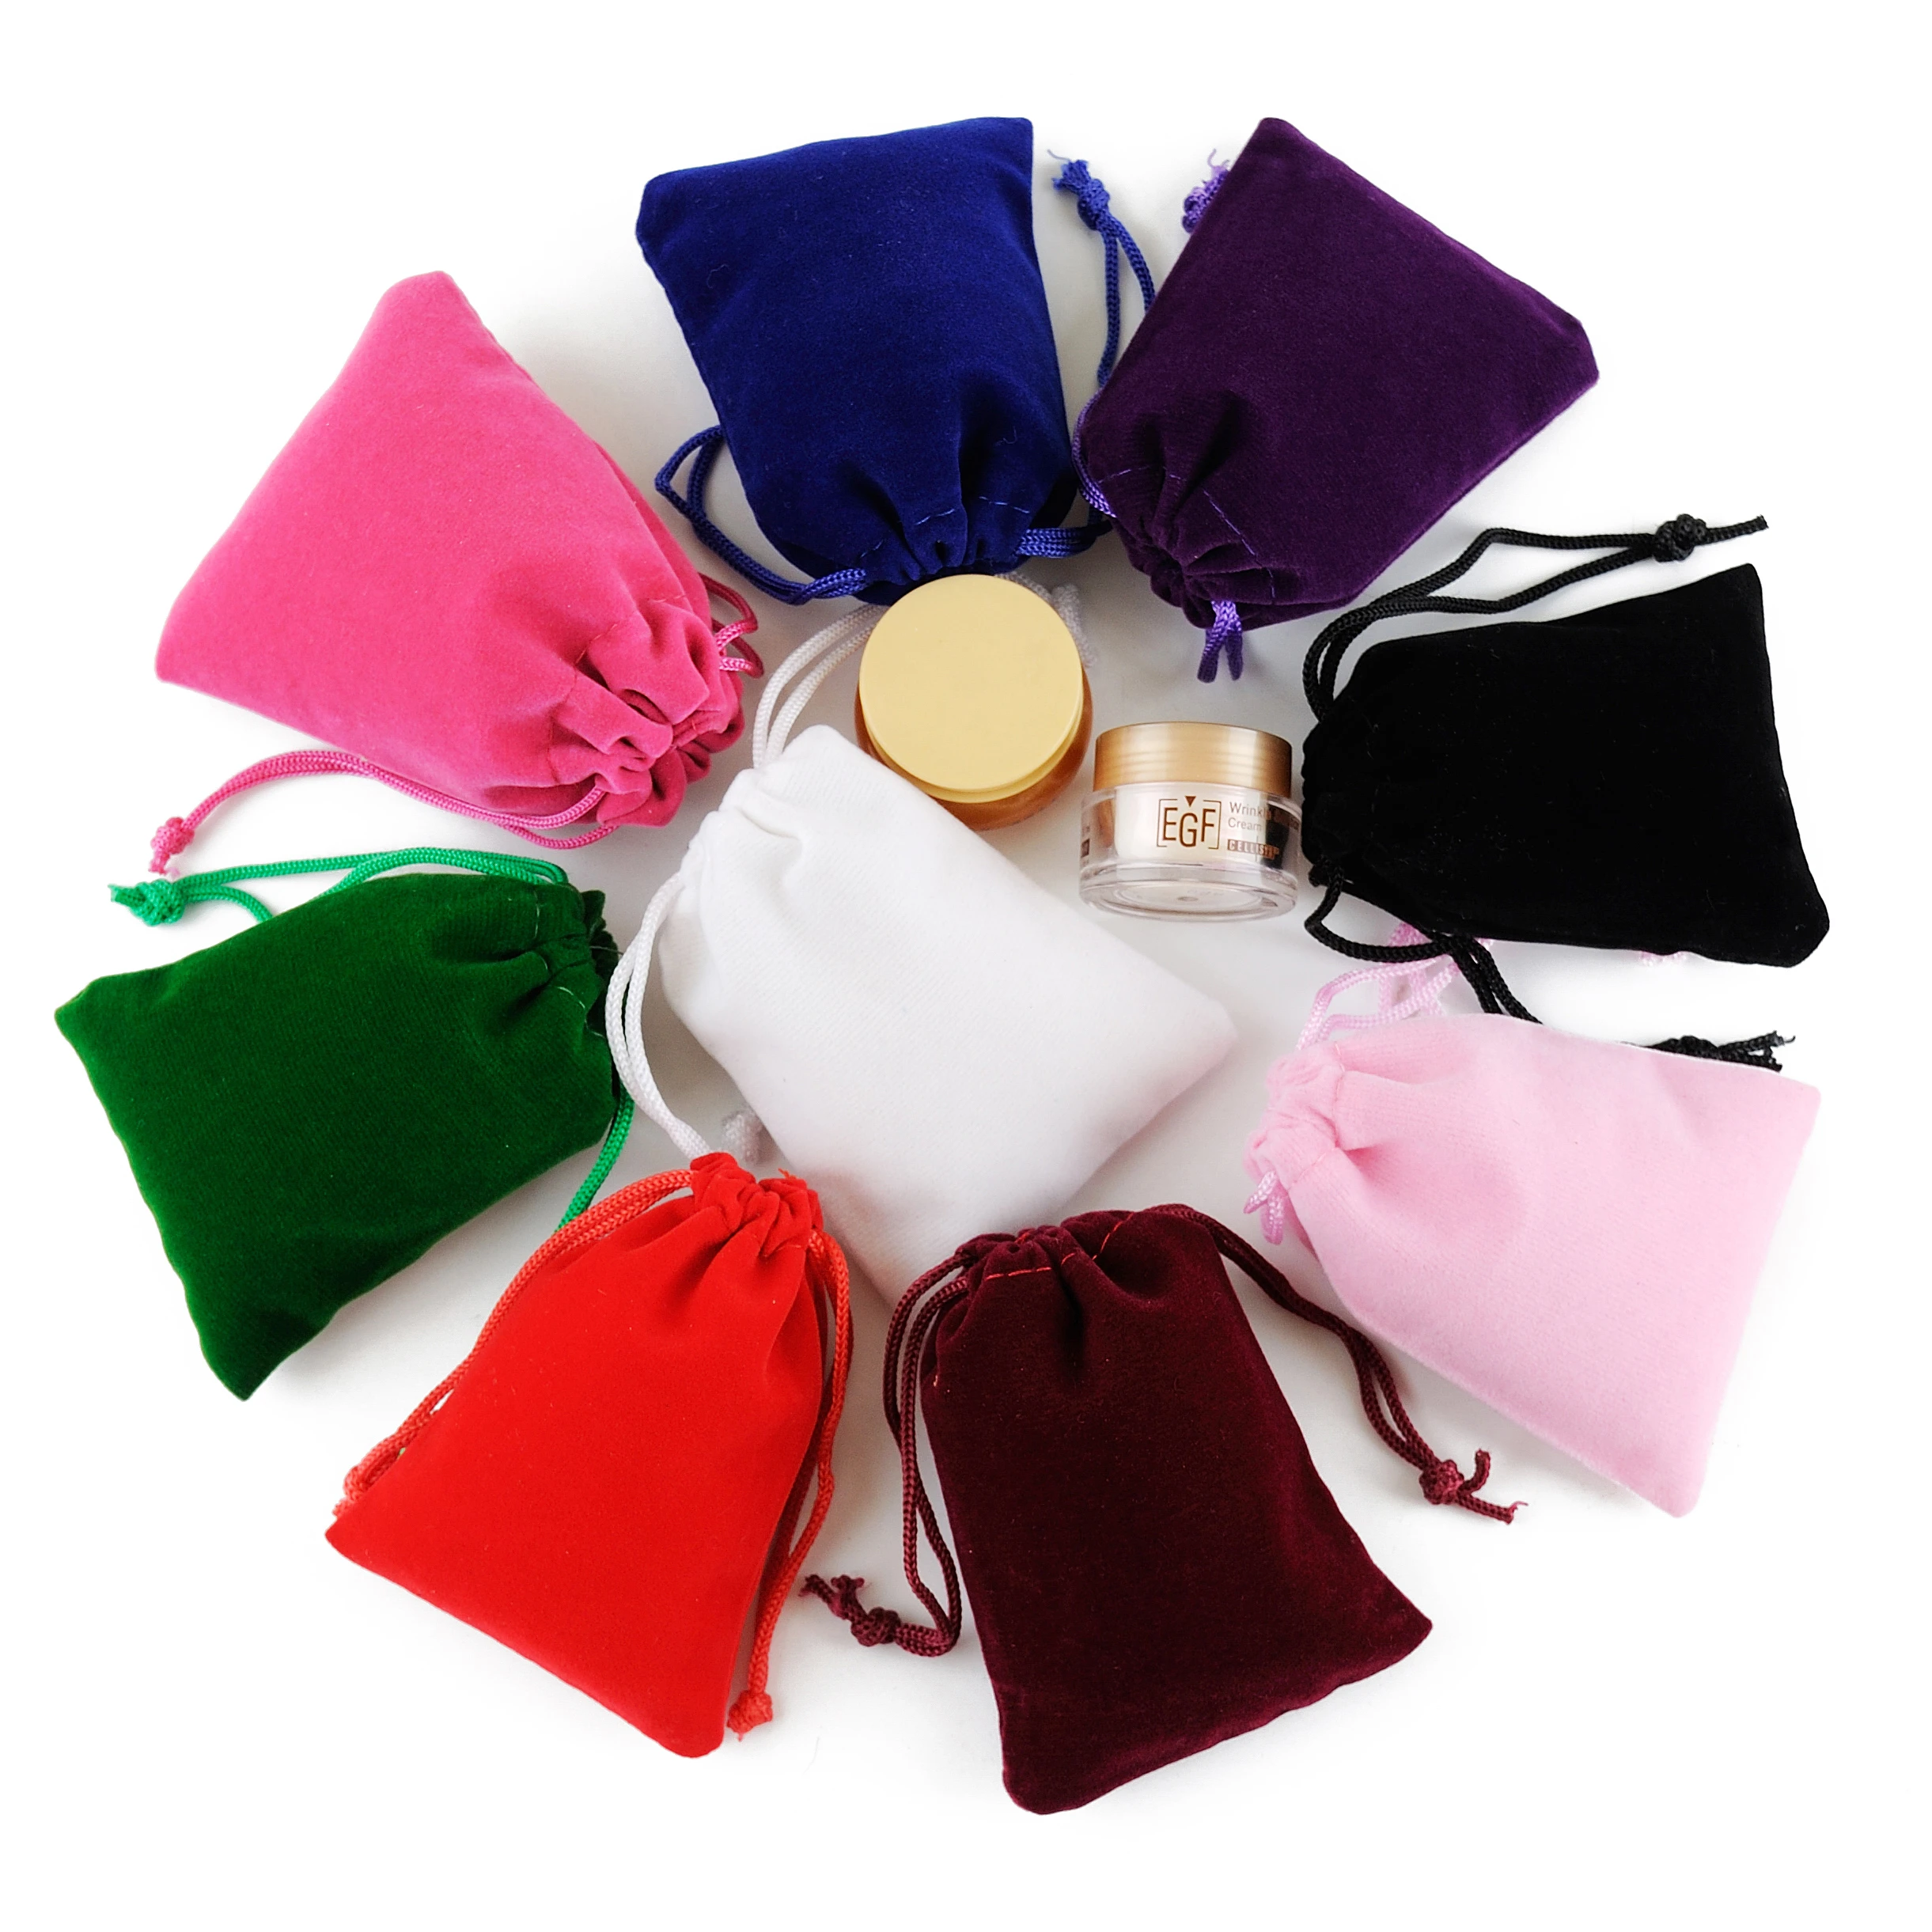 Velvet Bag 10Pcs/Lot Drawstrings Pouches Big size Jewelry Gift Display Packing Bags Flannel Sachet Fabric Bolsa Can Customized